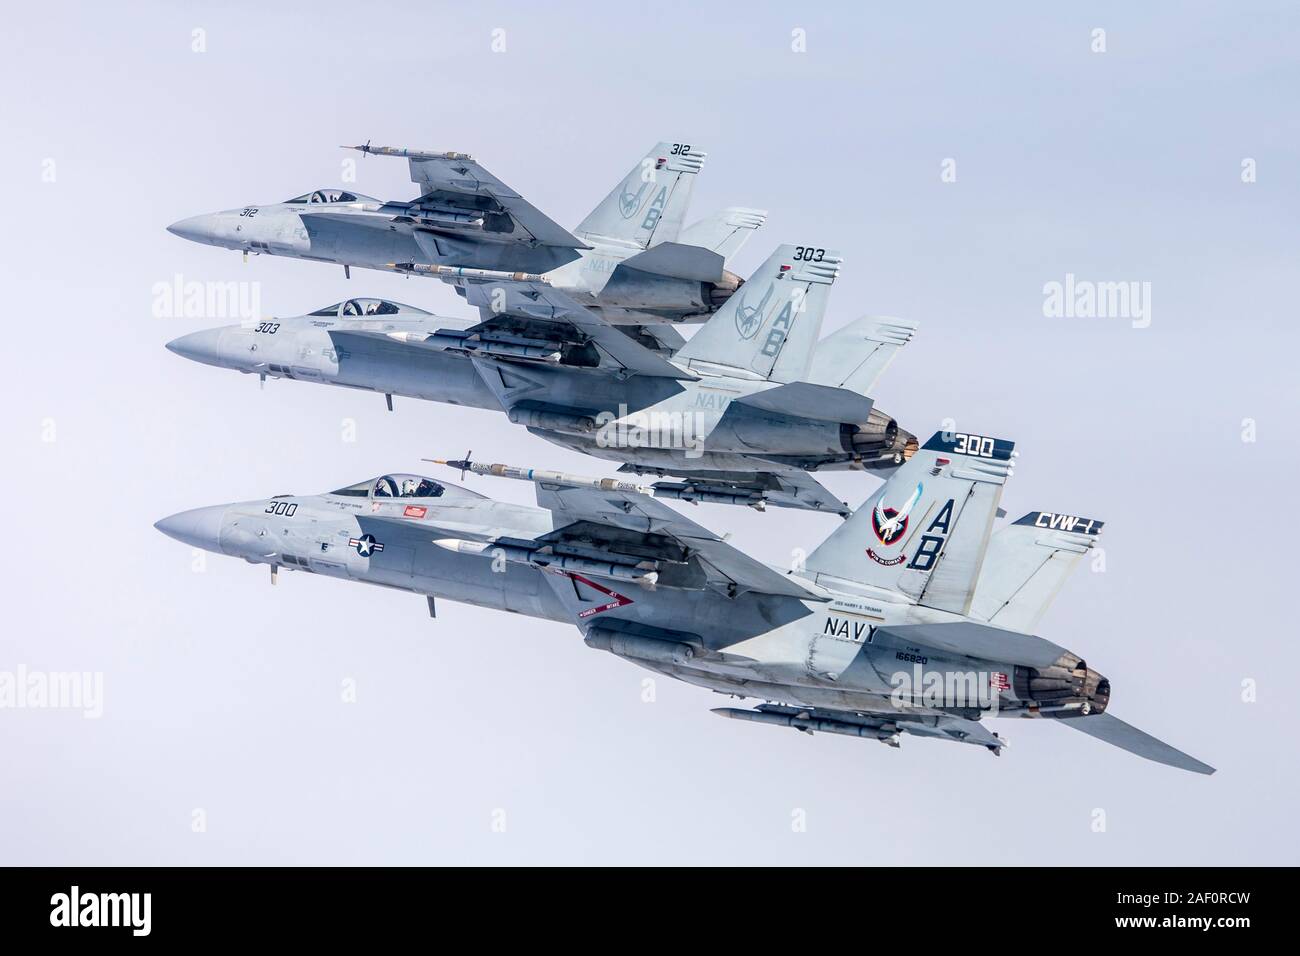 LEMOORE, California (March 7, 2019) Three F/A-18E aircraft from Naval Air Station (NAS) Lemoore flown by LT Phil 'Quitter' Murphy, LCDR Sean 'Dora' Tuohy, and LT Nicholas 'D-POD' Corey from Strike Fighter Squadron (VFA) 136 'Knighthawks' fly in formation over the Sea Test Range Range after completing a training mission.  (U.S. Navy photo by Lt. Cmdr. Darin Russell/Released) Stock Photo